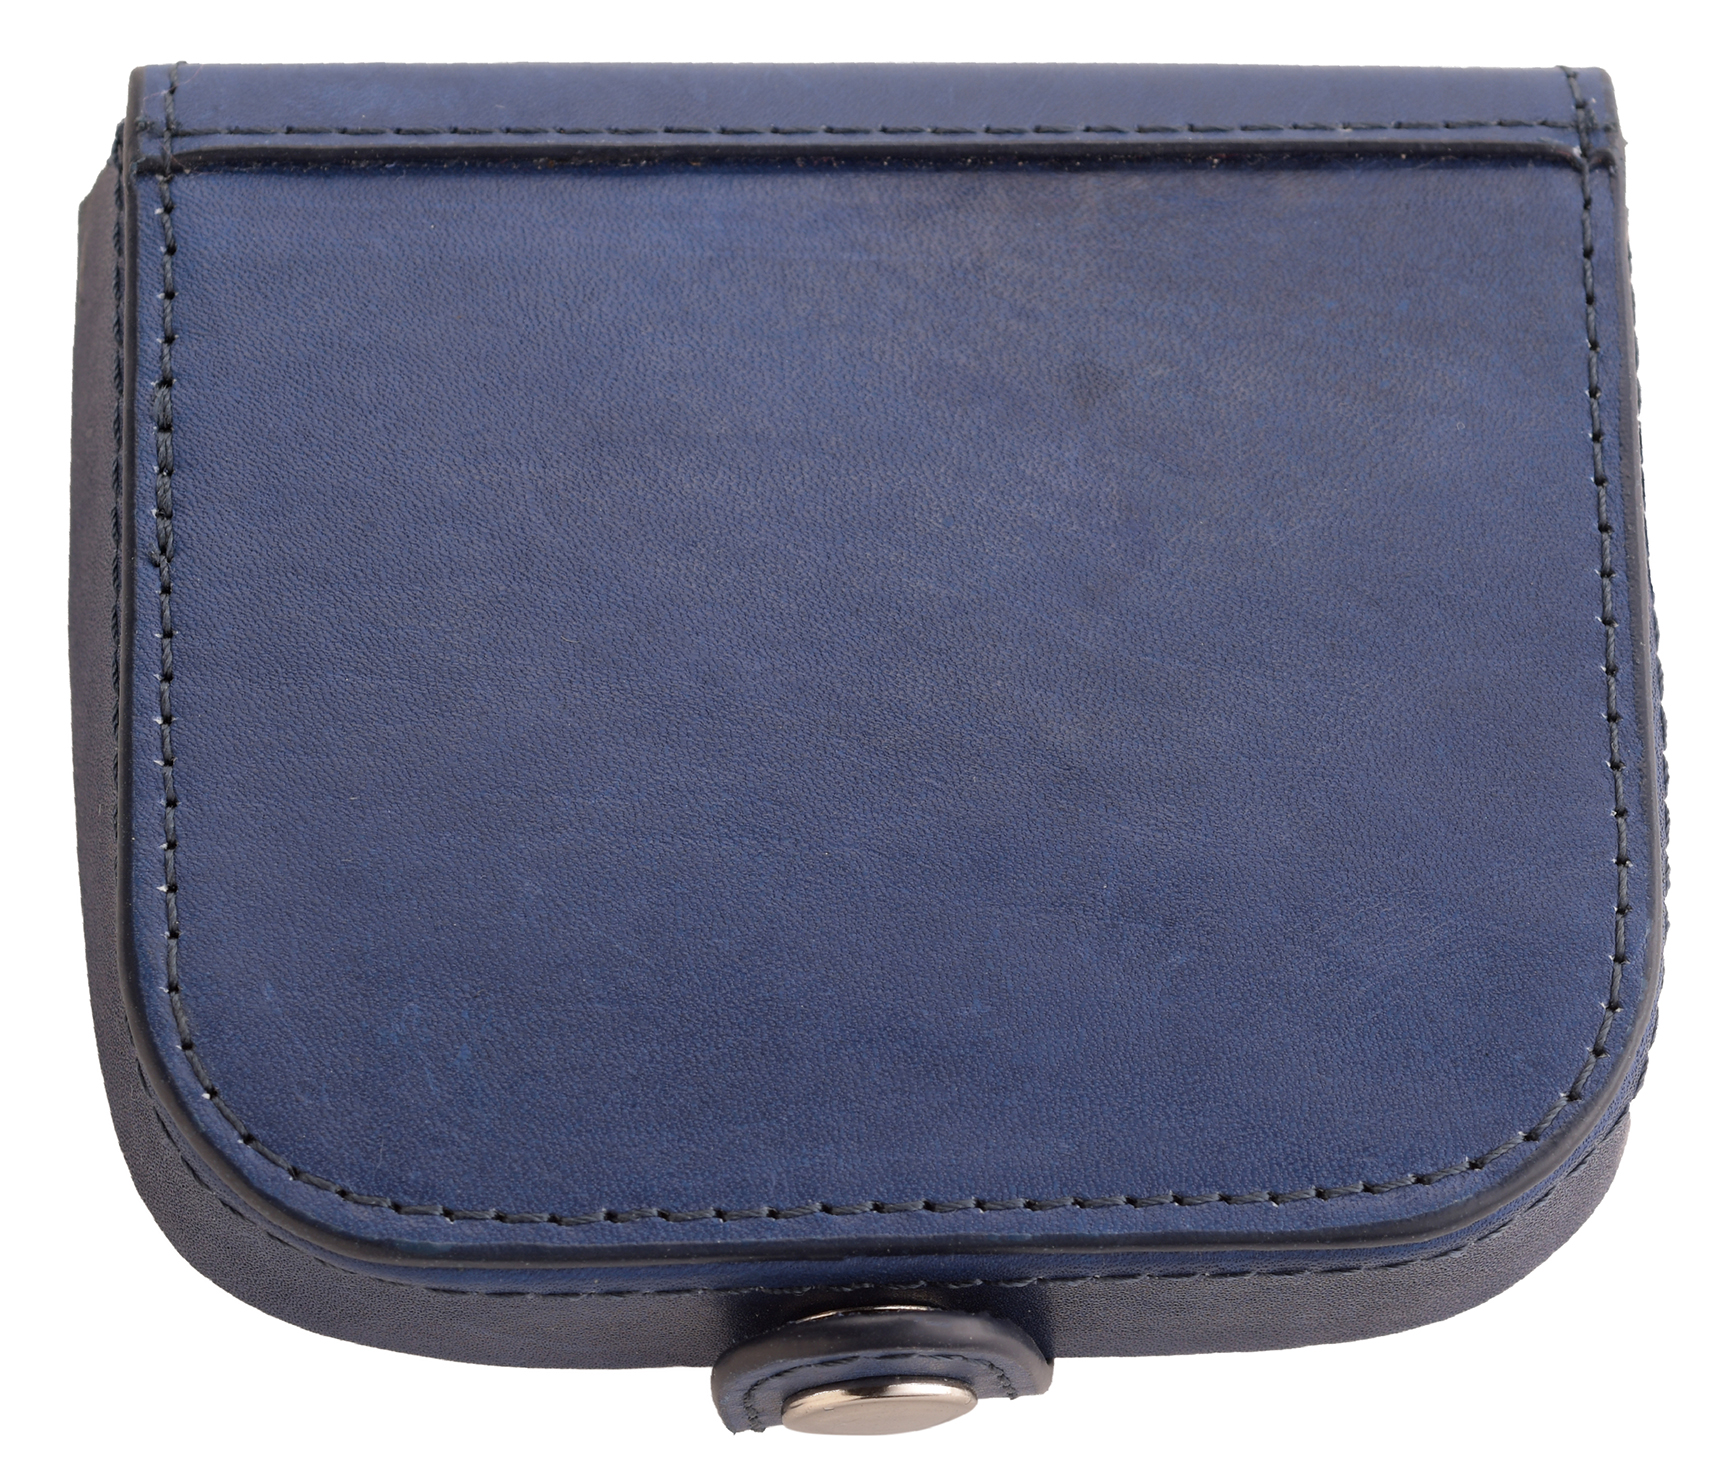 Mens Premium Grade Leather Tray Coin Purse with Note Section Black Blue Brown 